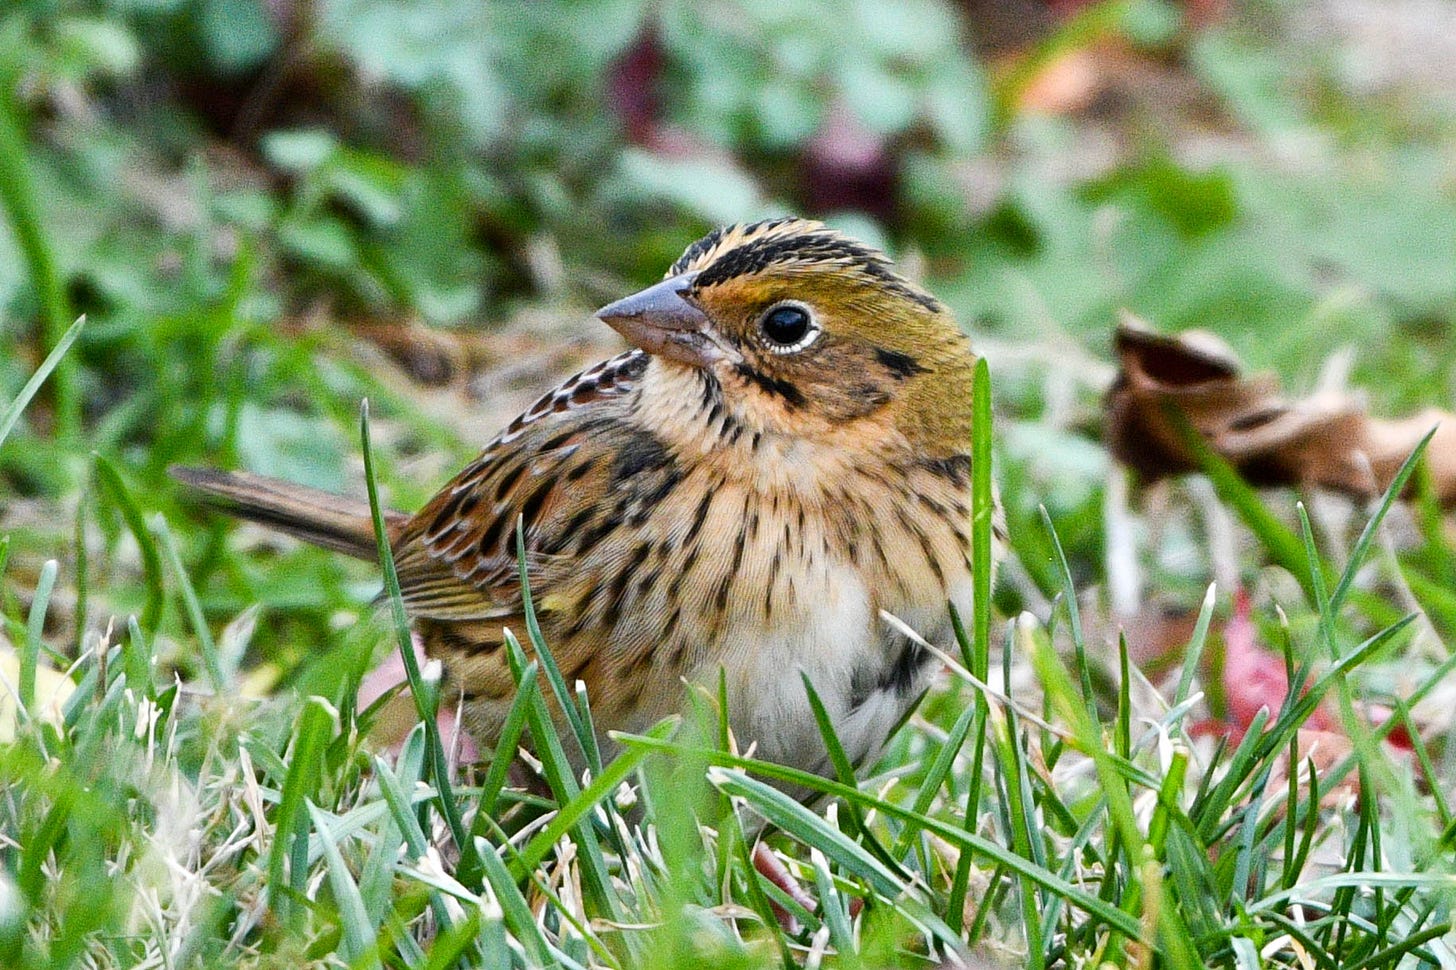 A photo of a Henslow's sparrow in the grass, facing left.